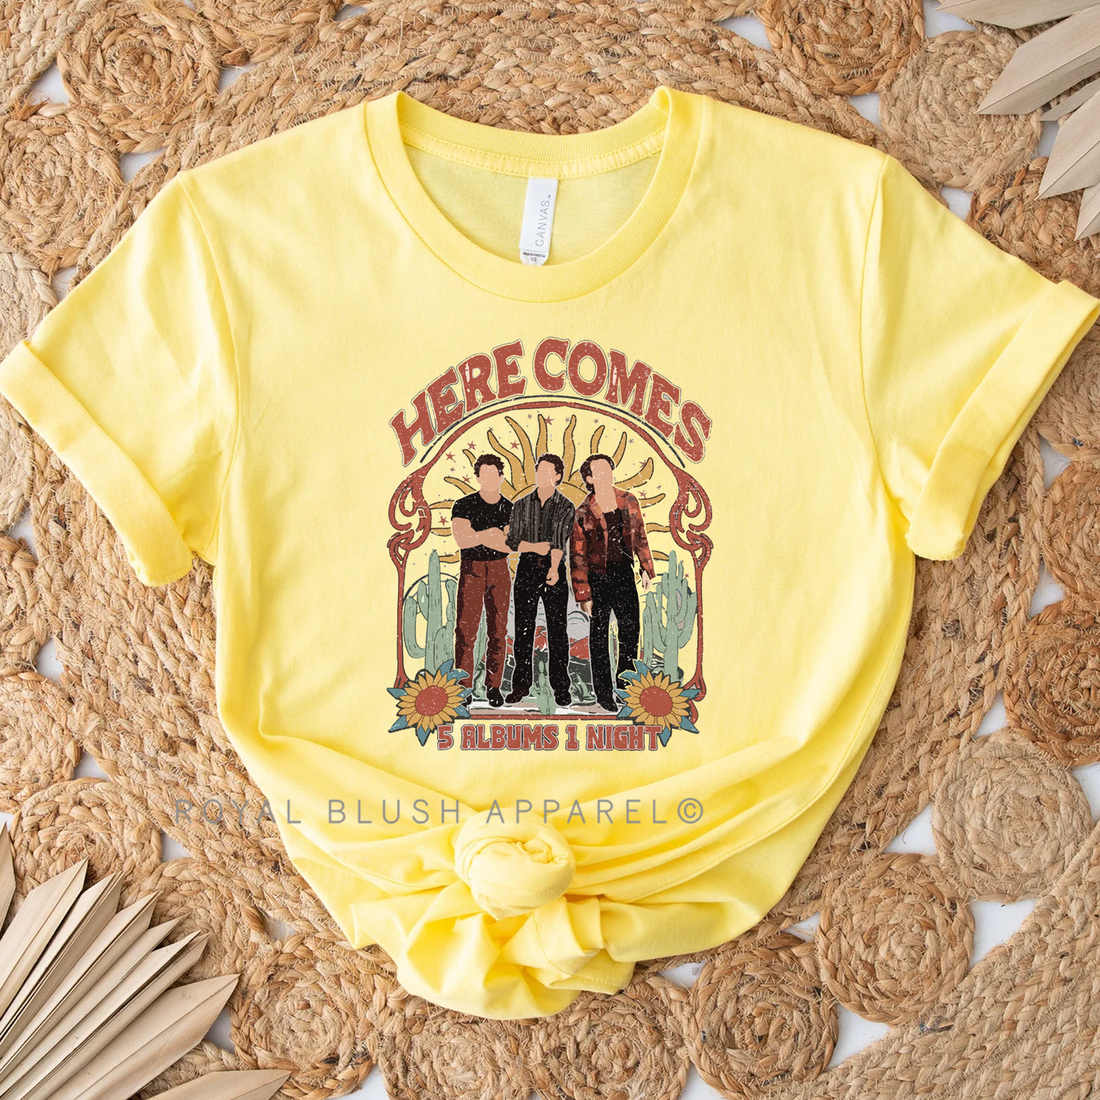 Here Comes 5 Albums 1 Night Relaxed Unisex T-shirt